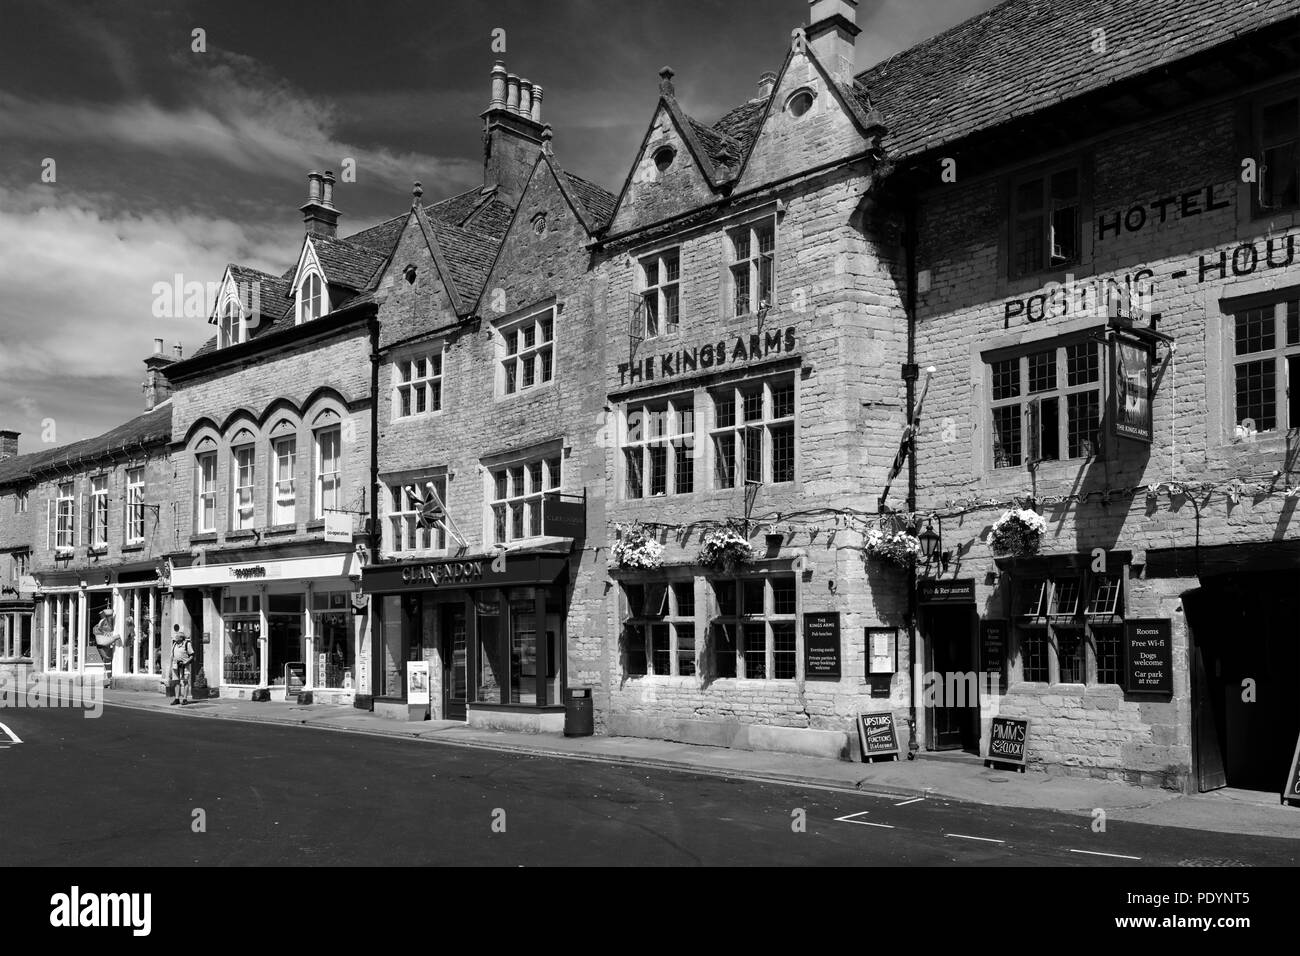 Le Kings Arms Coaching Inn, Stow on the Wold, Gloucestershire, Cotswolds, en Angleterre Banque D'Images